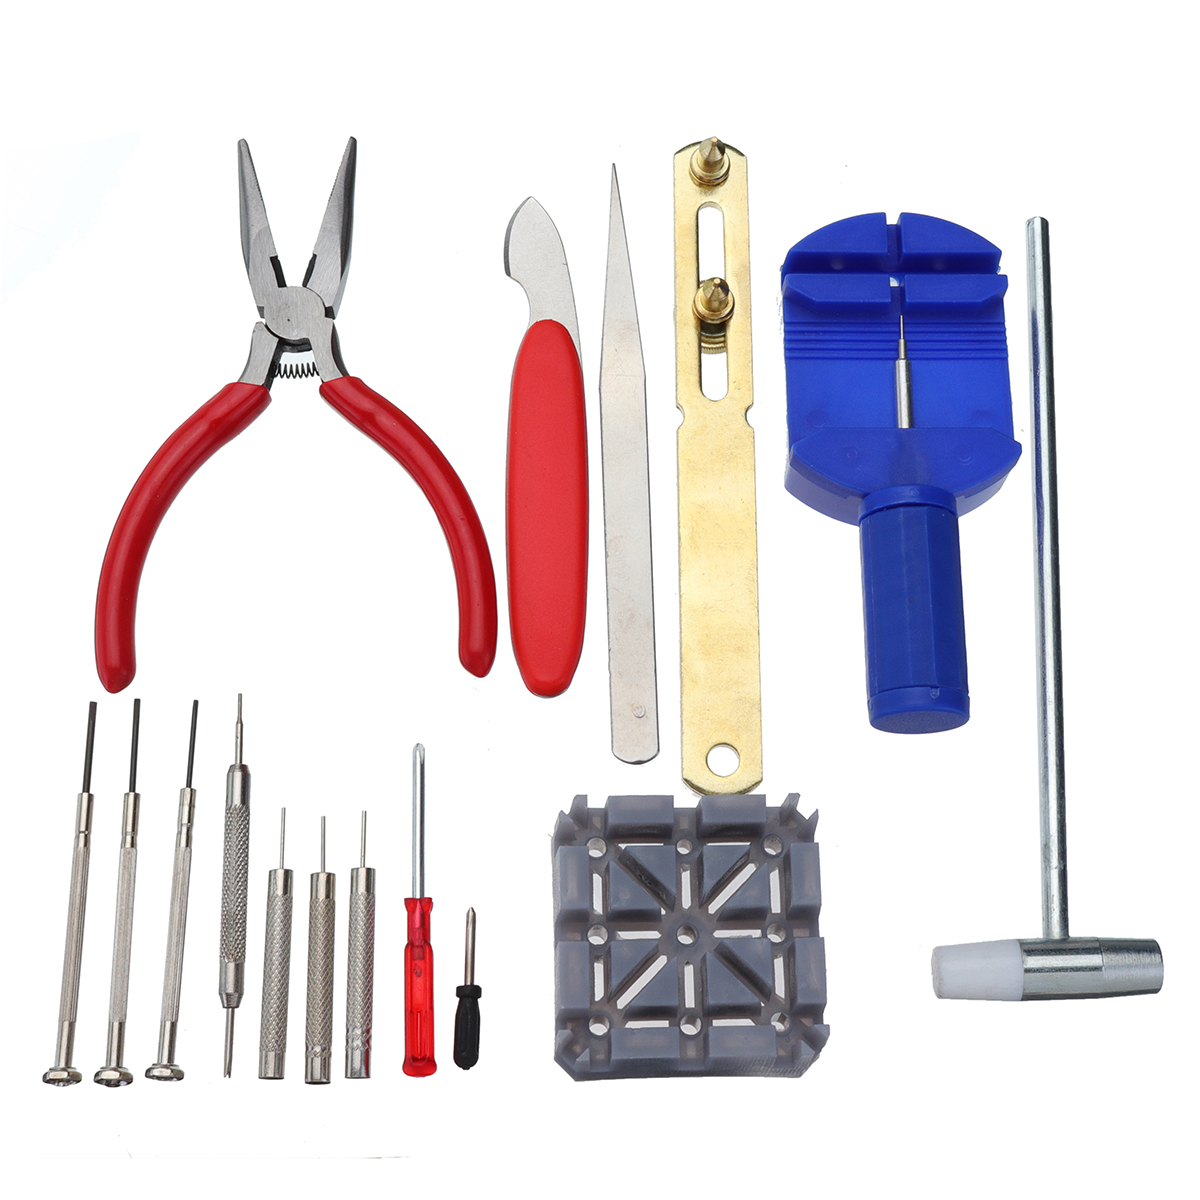 Find 14 in 1 Screwdriver Repair Tool Sets For Watch Repair for Sale on Gipsybee.com with cryptocurrencies